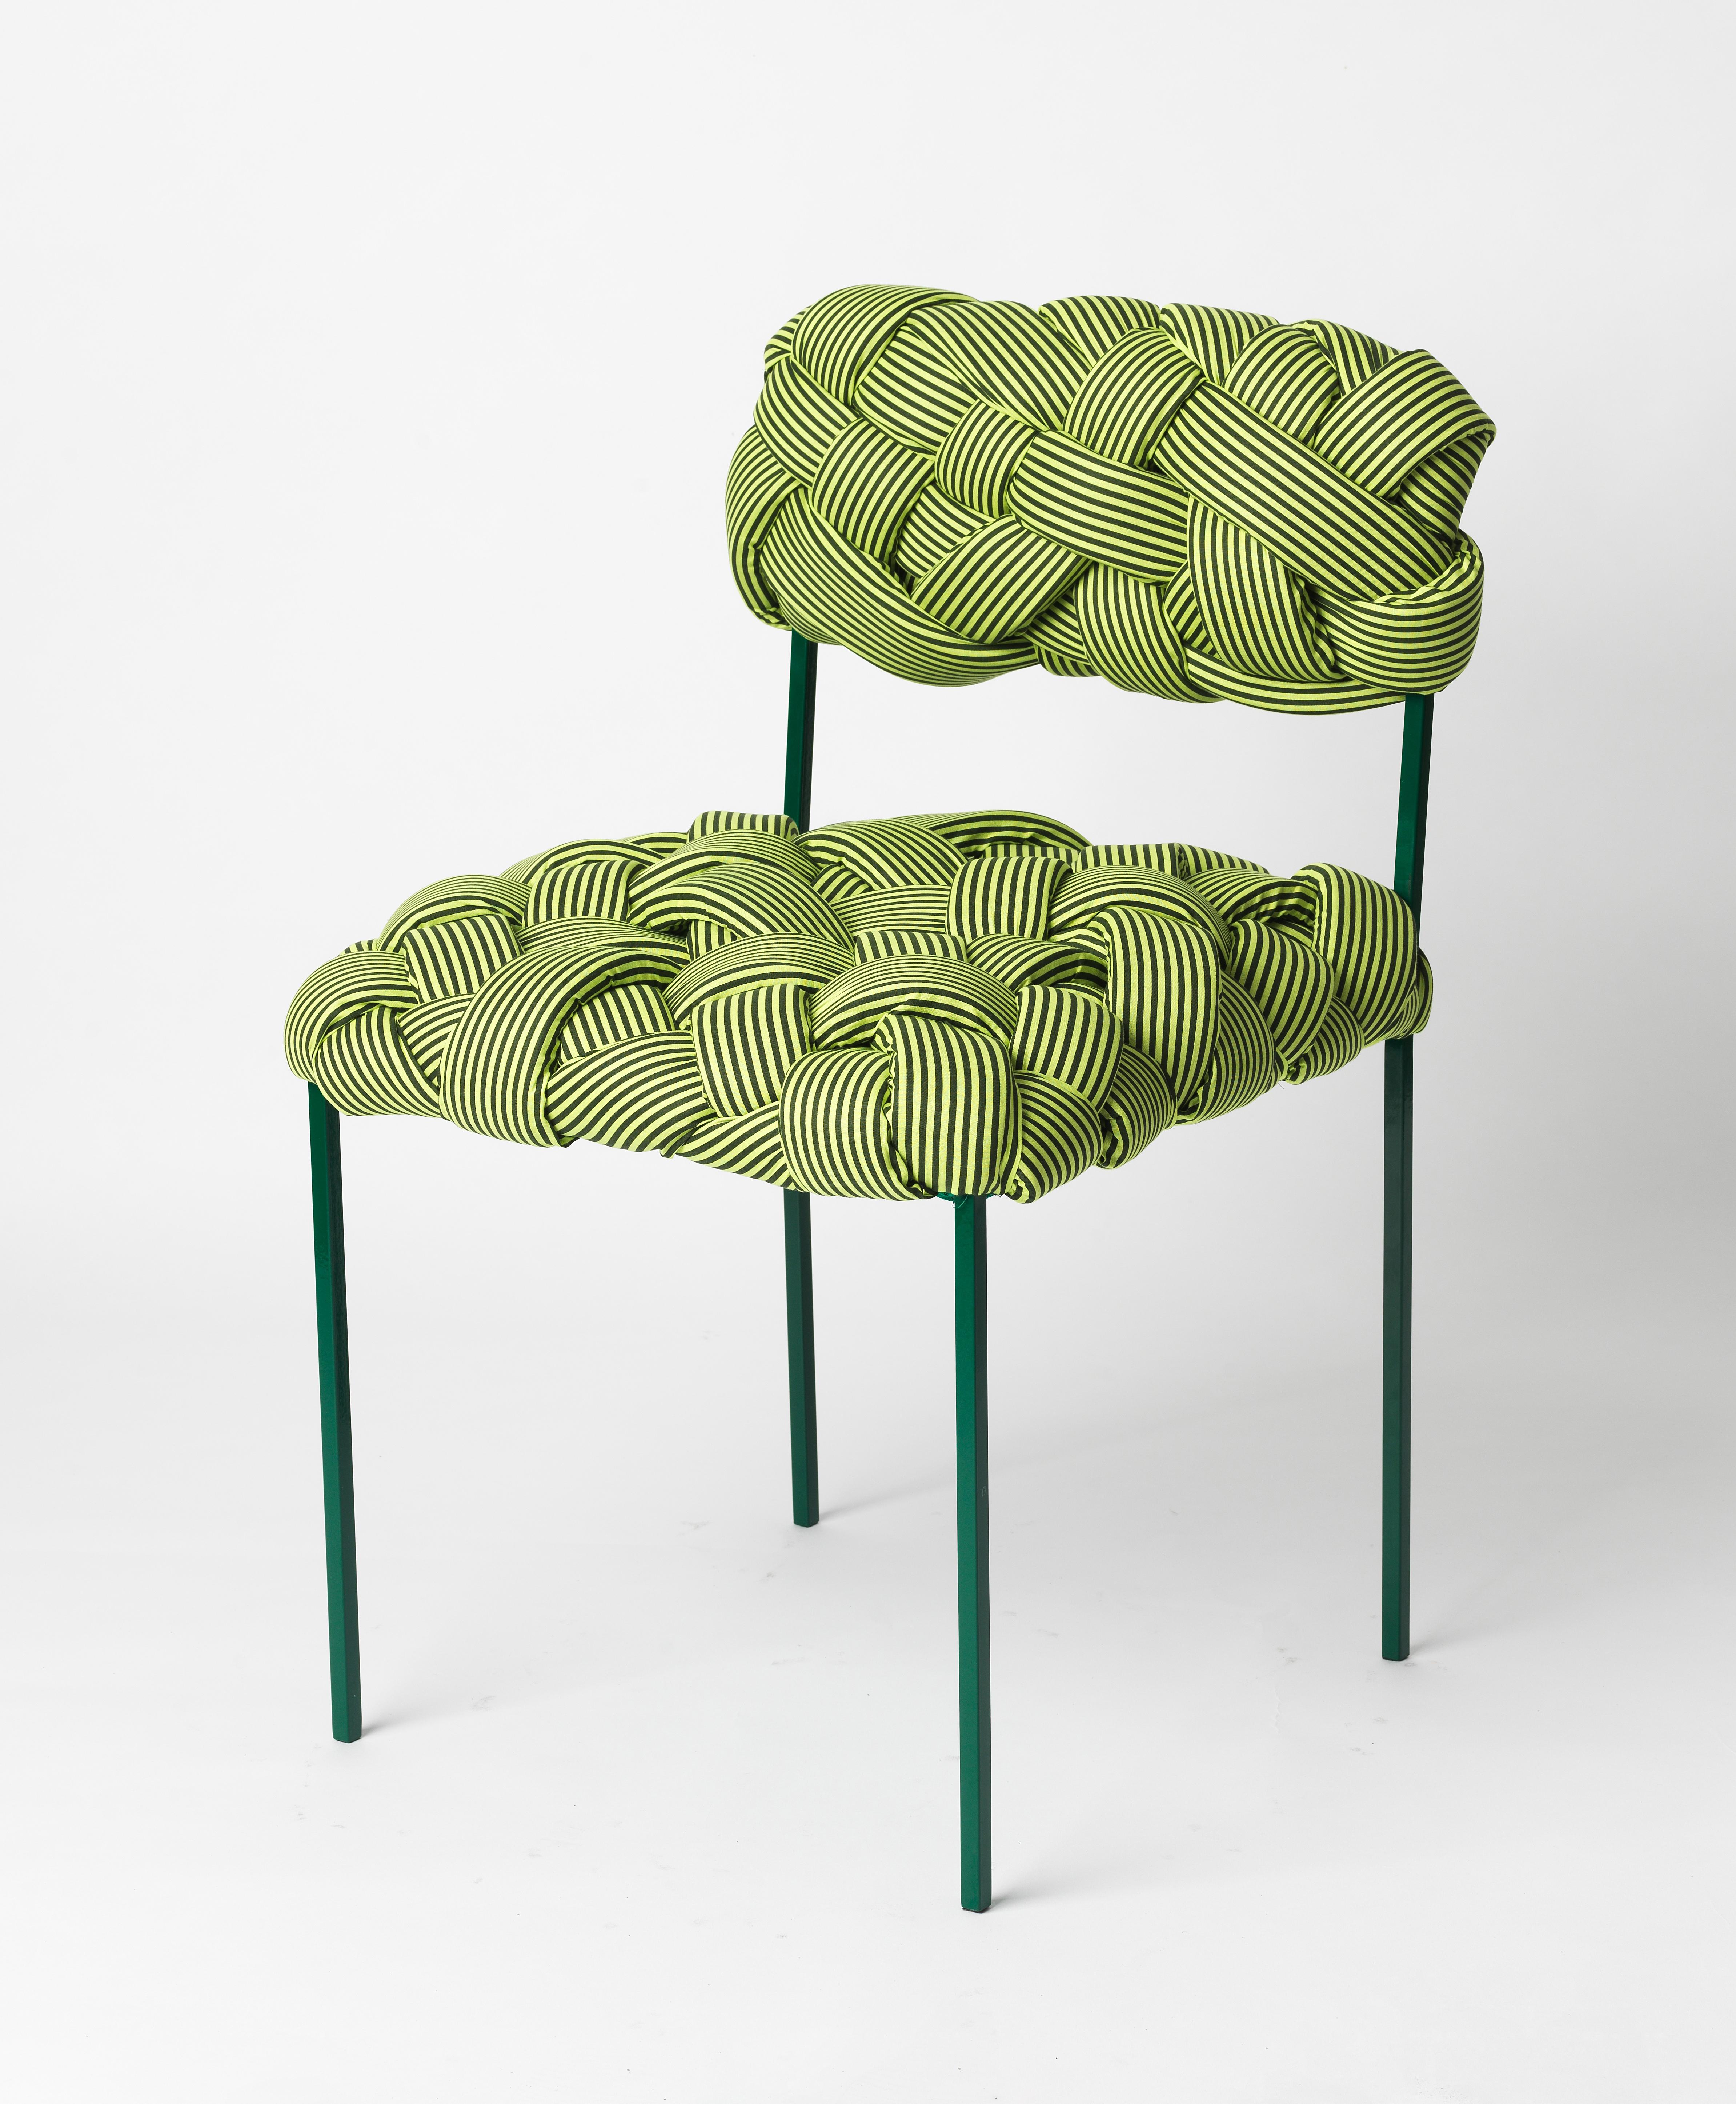 This contemporary chair is part of the Cloud collection, which was created around the concept of trees. These contemporary stools and benches are made with cotton fabric and foam stripes, woven and stitched by hand. Each piece is unique, as the